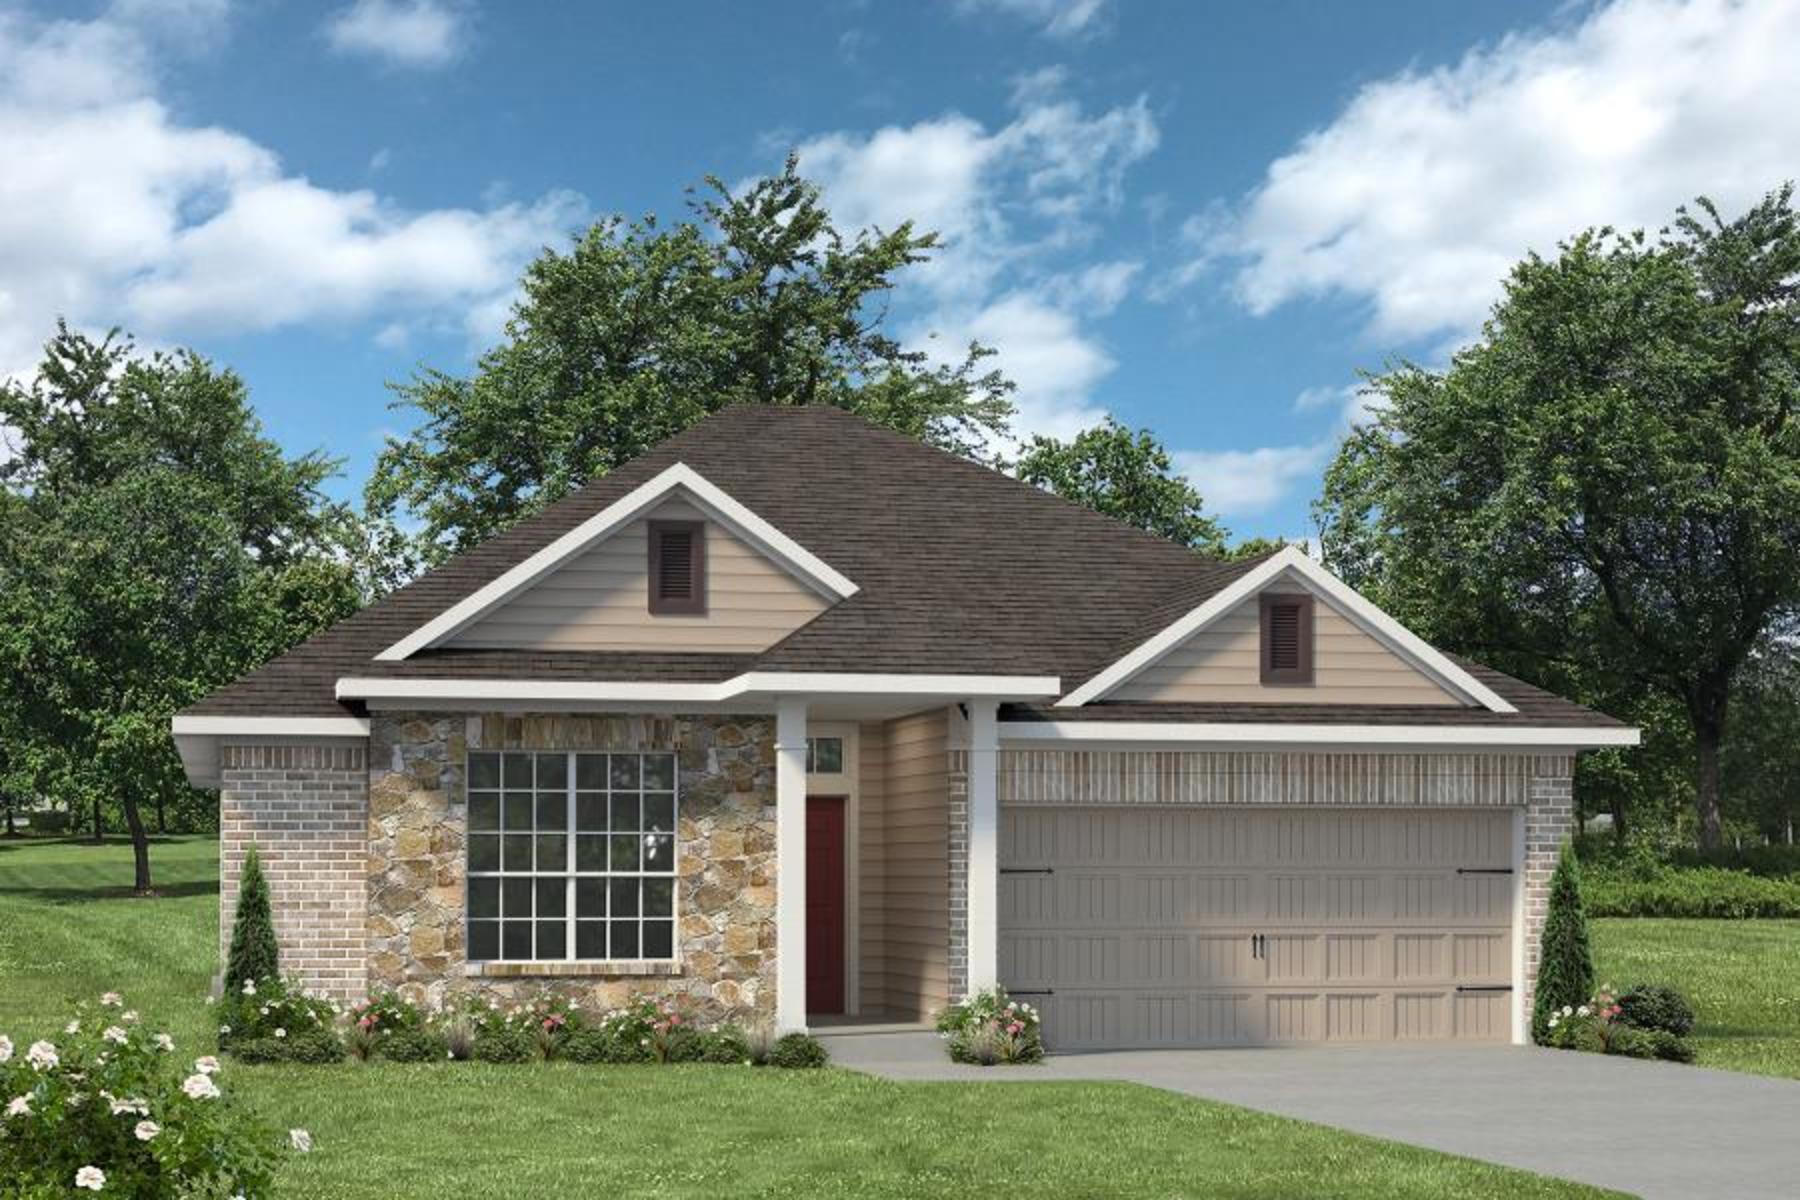 https://myhome.anewgo.com/client/stylecraft/community/Build%20On%20Your%20Lot/plan/1514%20%7C%20Bedford%20Select?elevId=68. 1,514sf New Home